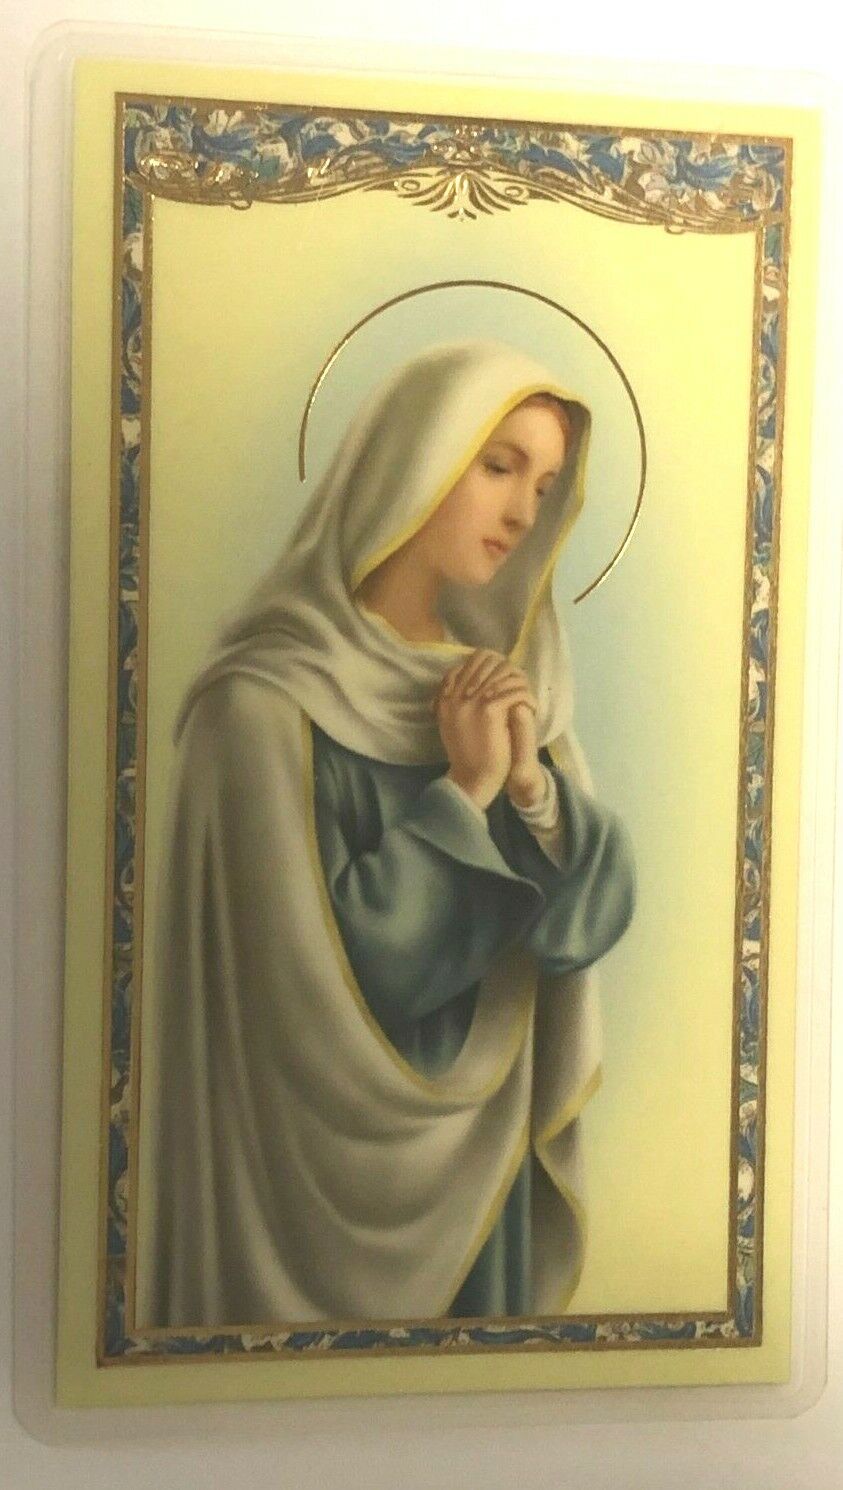 A Nurse's Prayer Card, Laminated with Image of Our Lady in Prayer, new